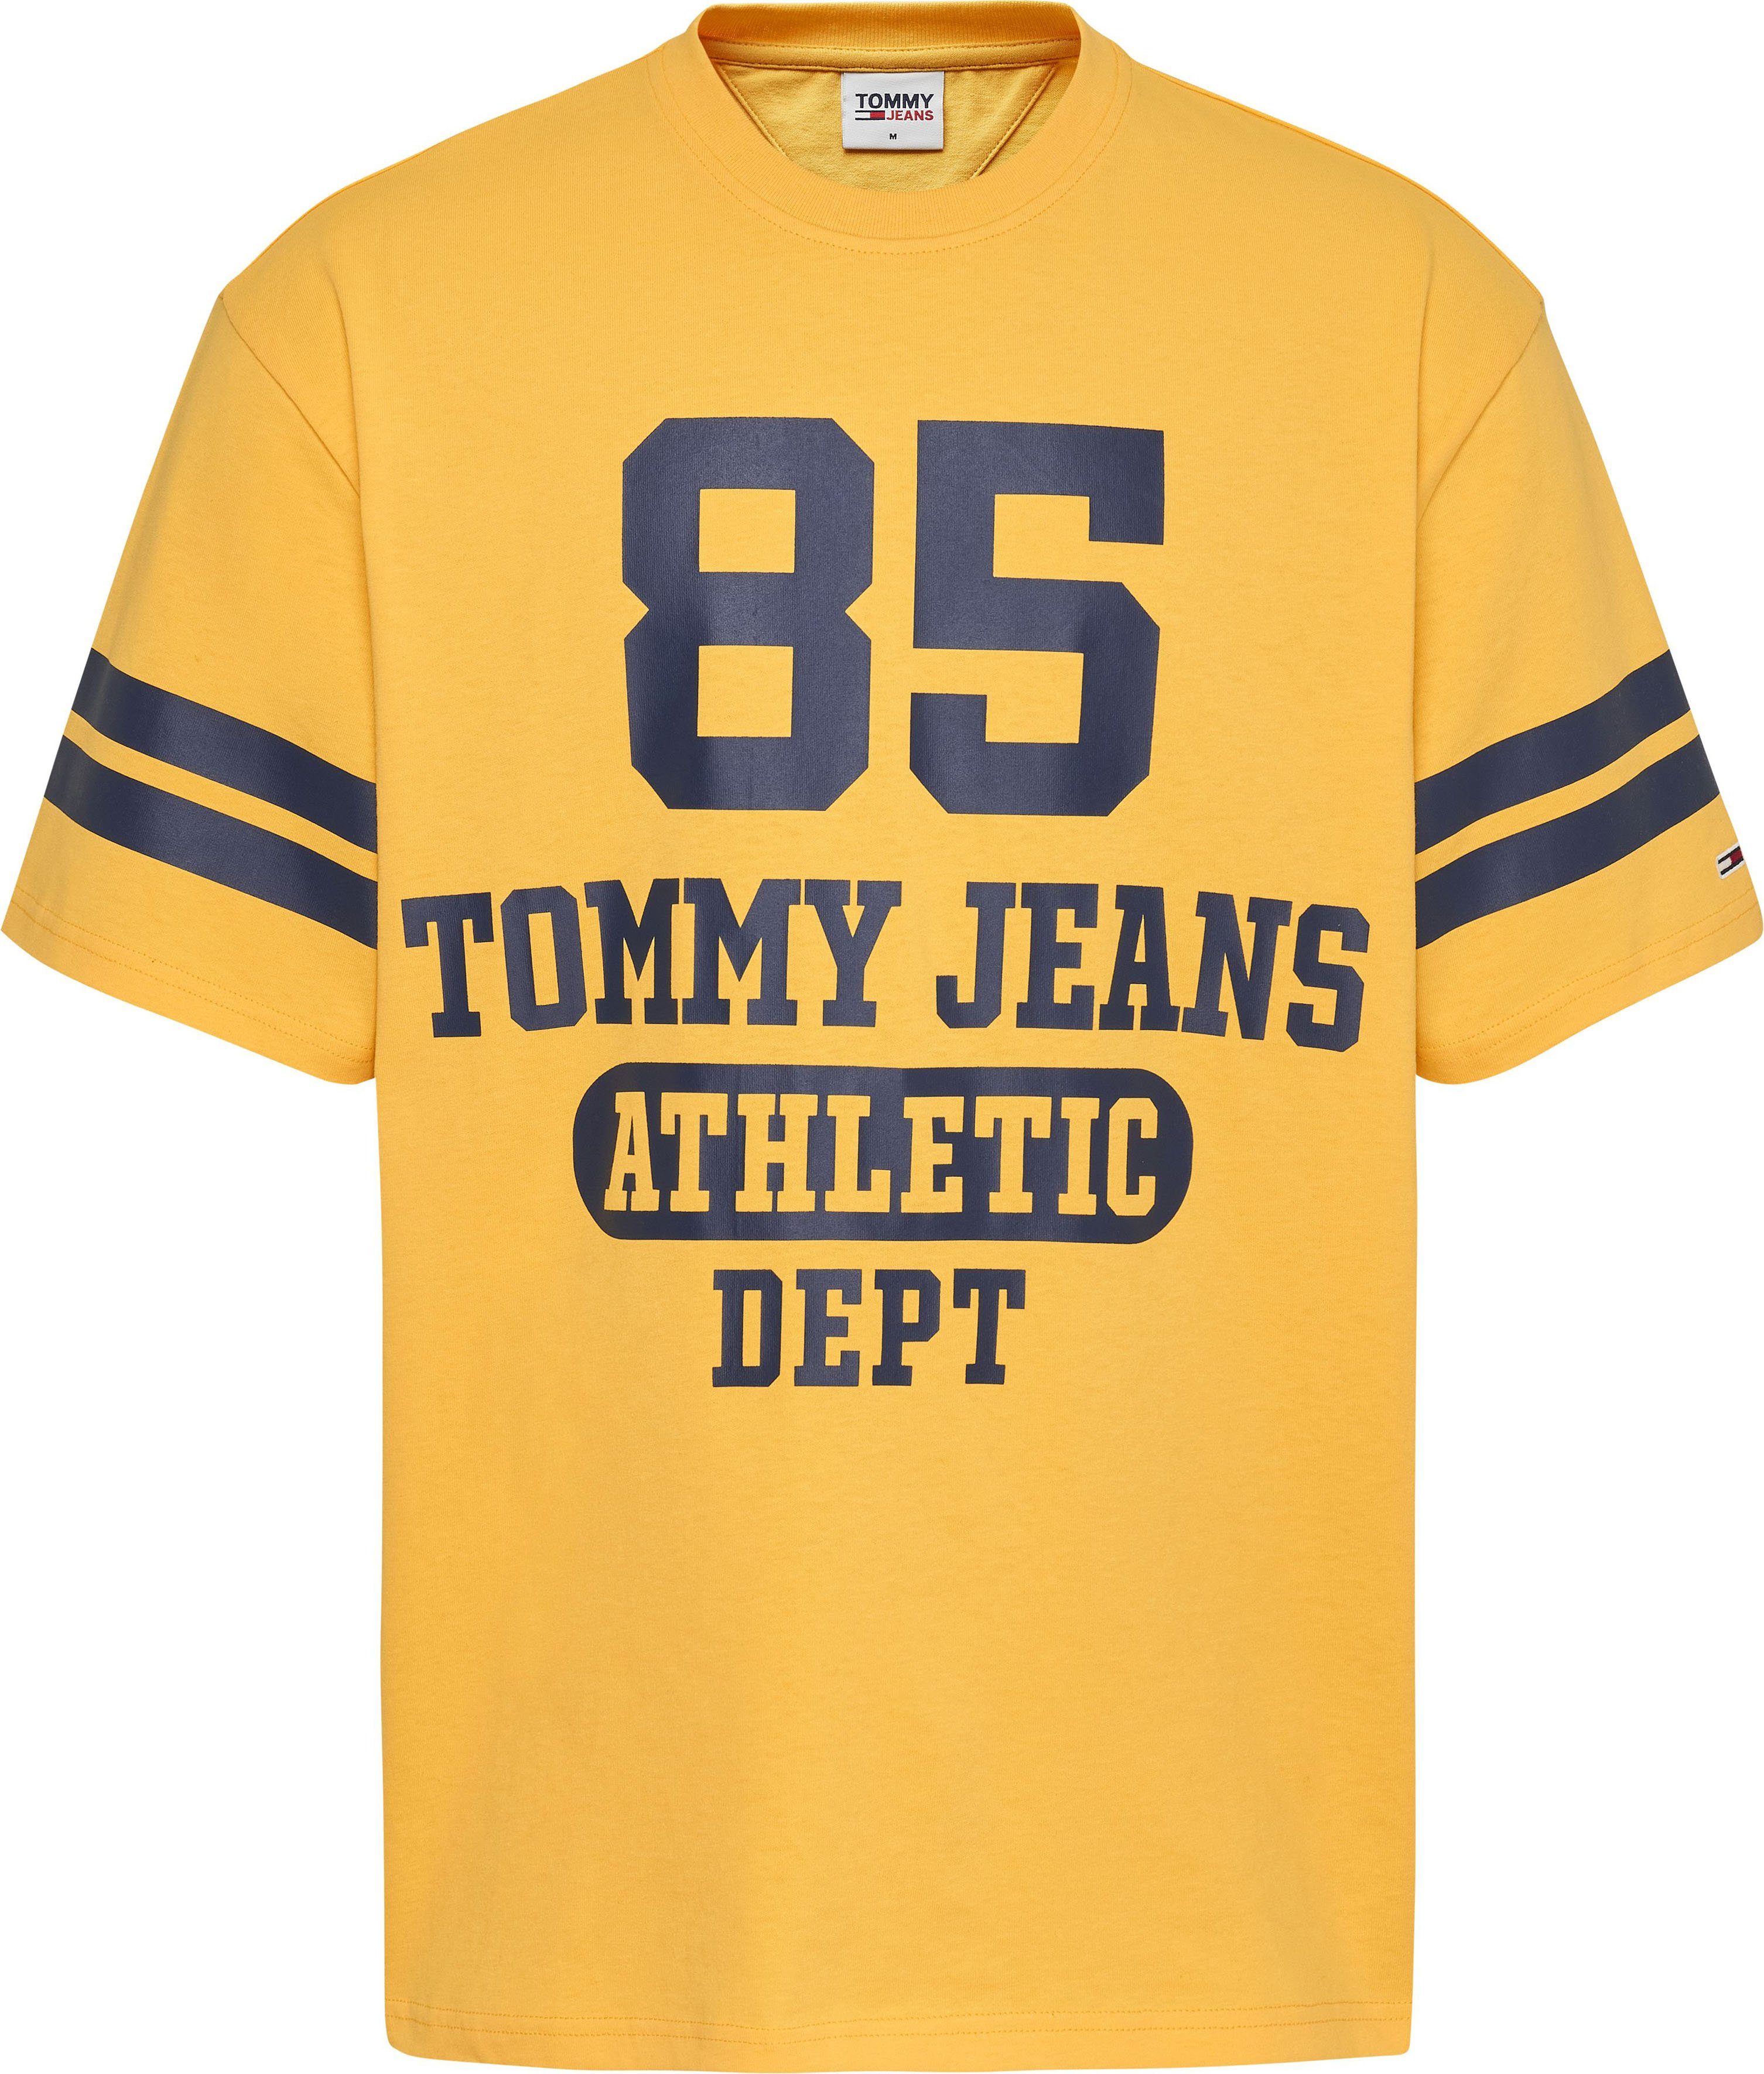 85 Yellow TJM SKATER LOGO Warm Jeans T-Shirt COLLEGE Tommy